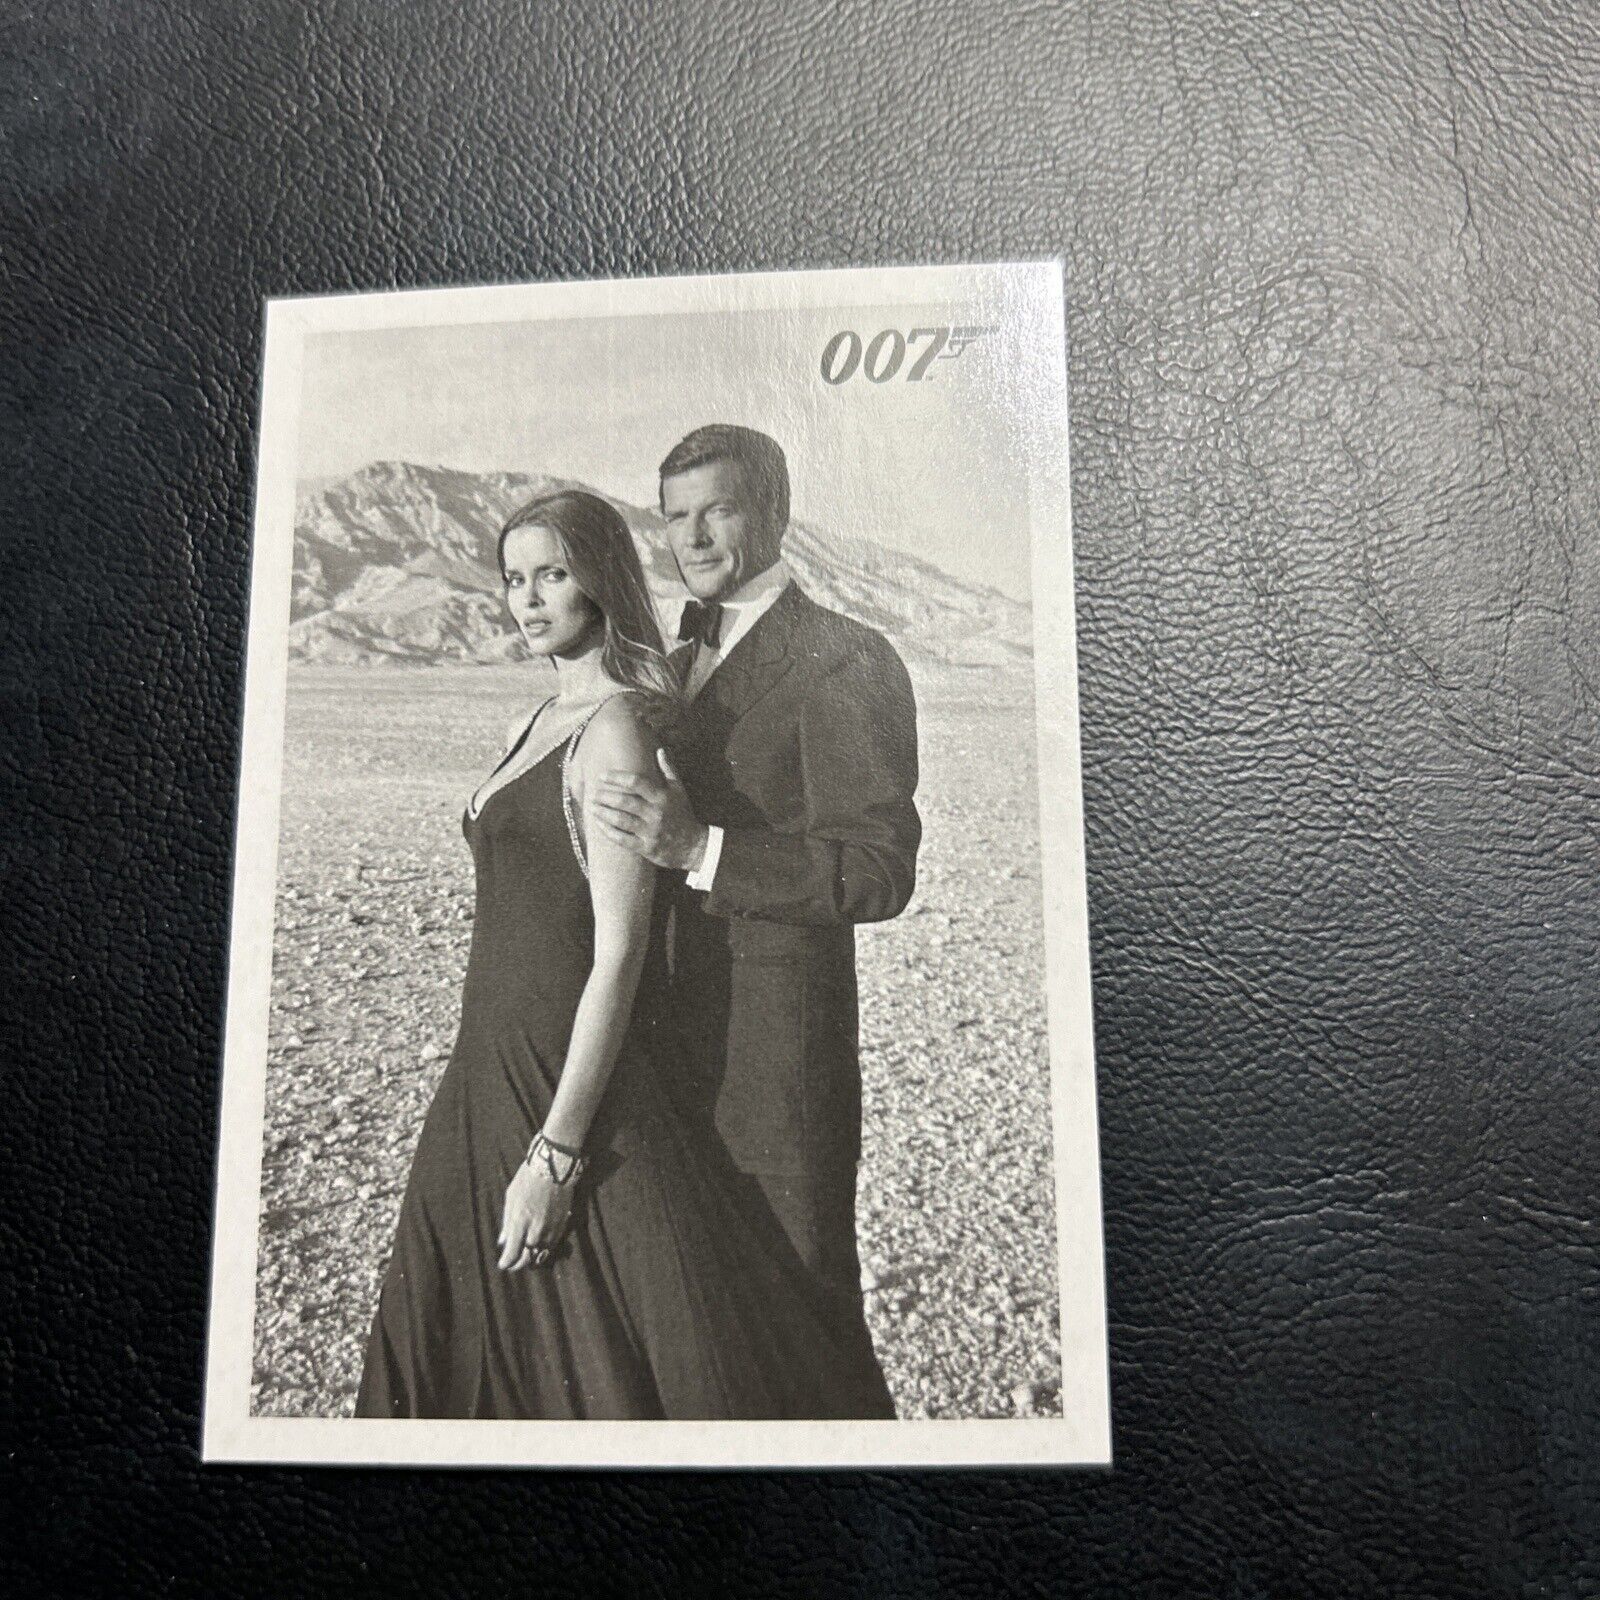 55b James Bond Archives 01 Roger Moore The Spy Who Loved Me